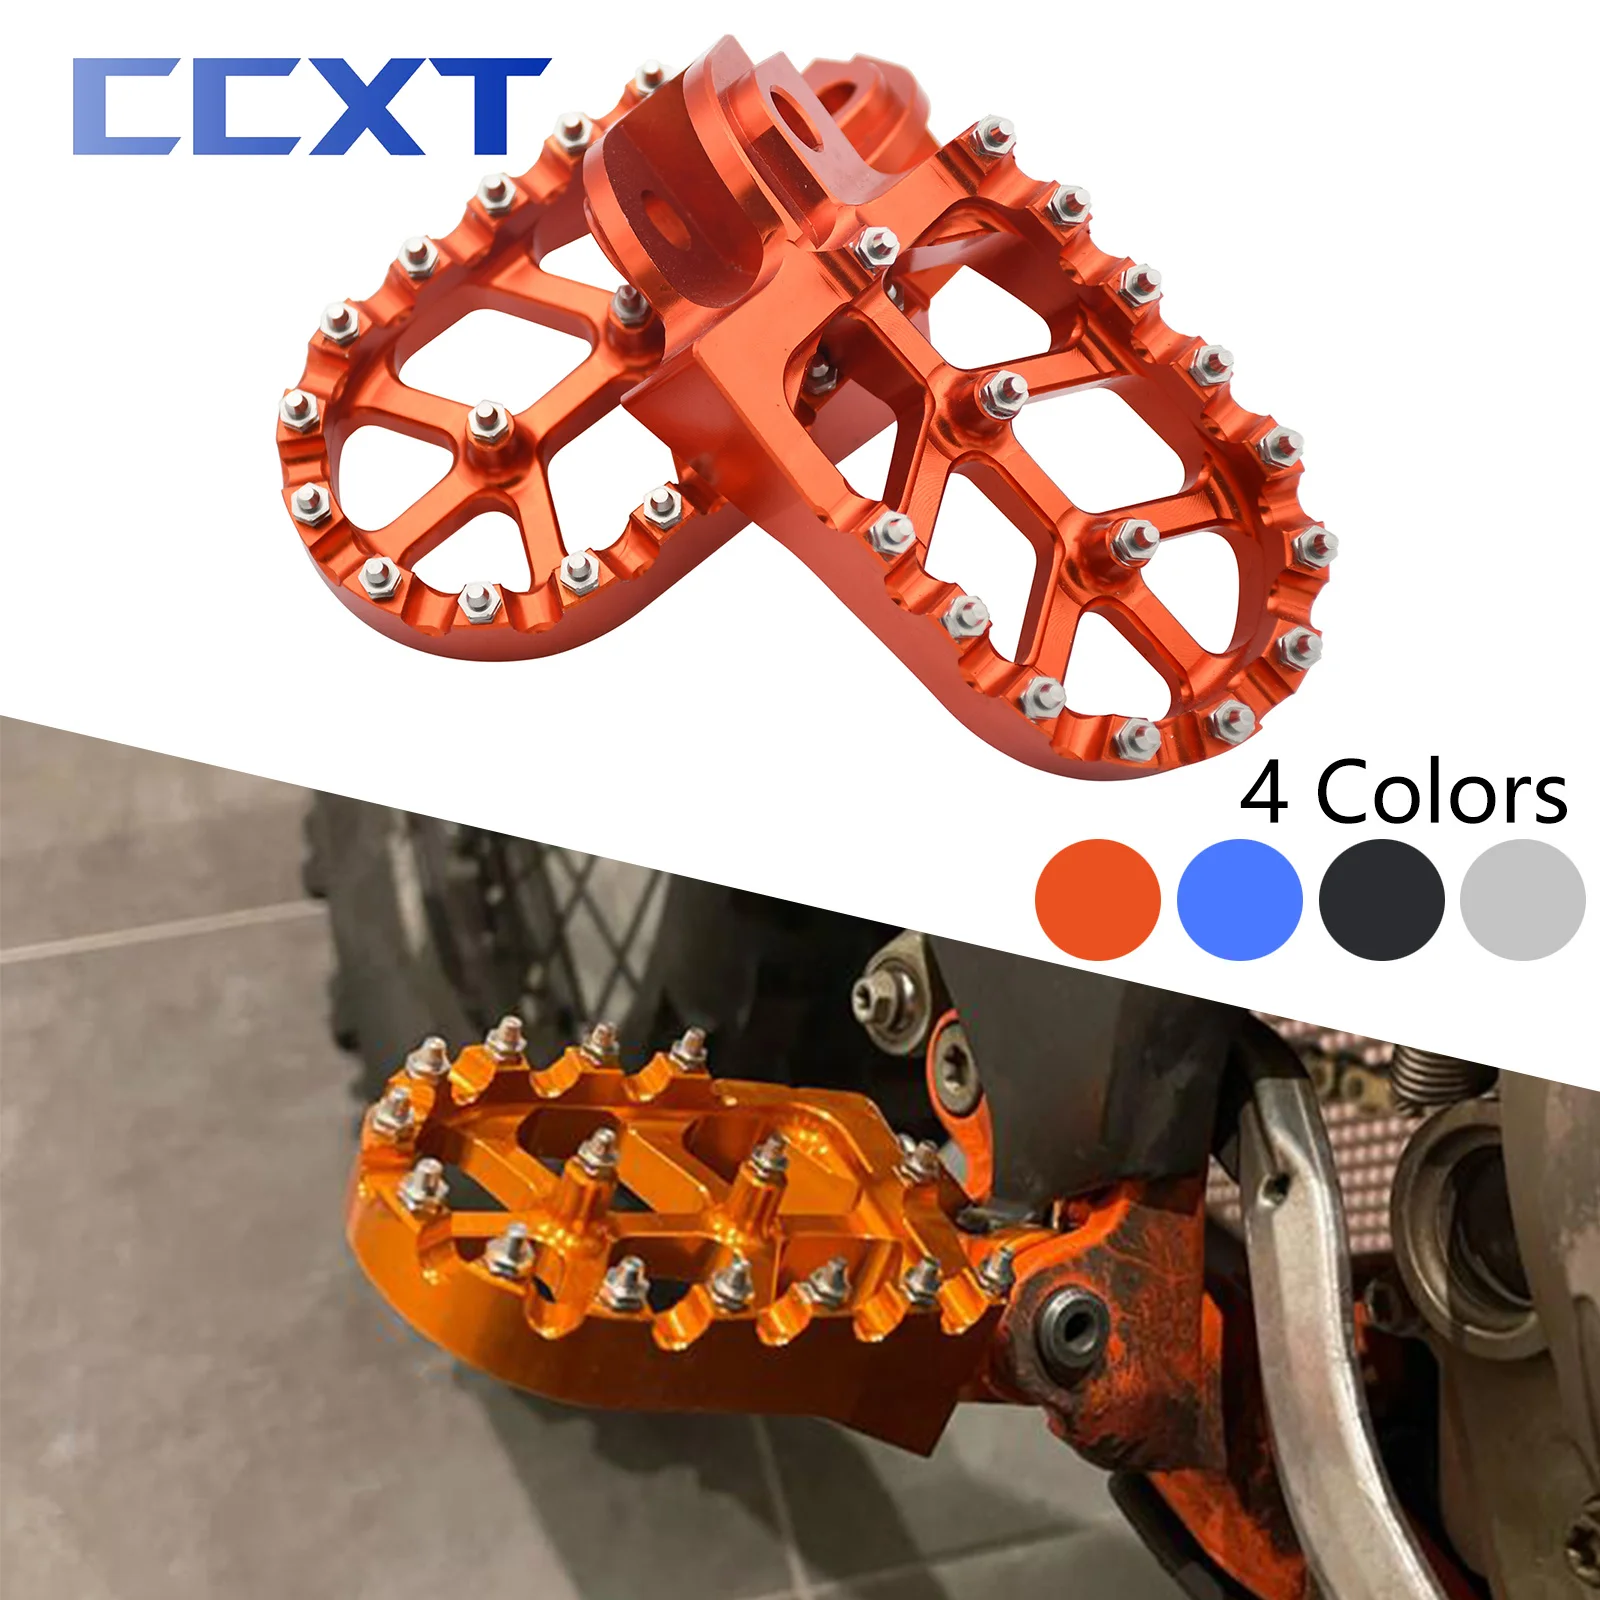 Motorcycle cnc foot pegs foot rests pedals for ktm sx sxf exc excf xc xcf xcw thumb200